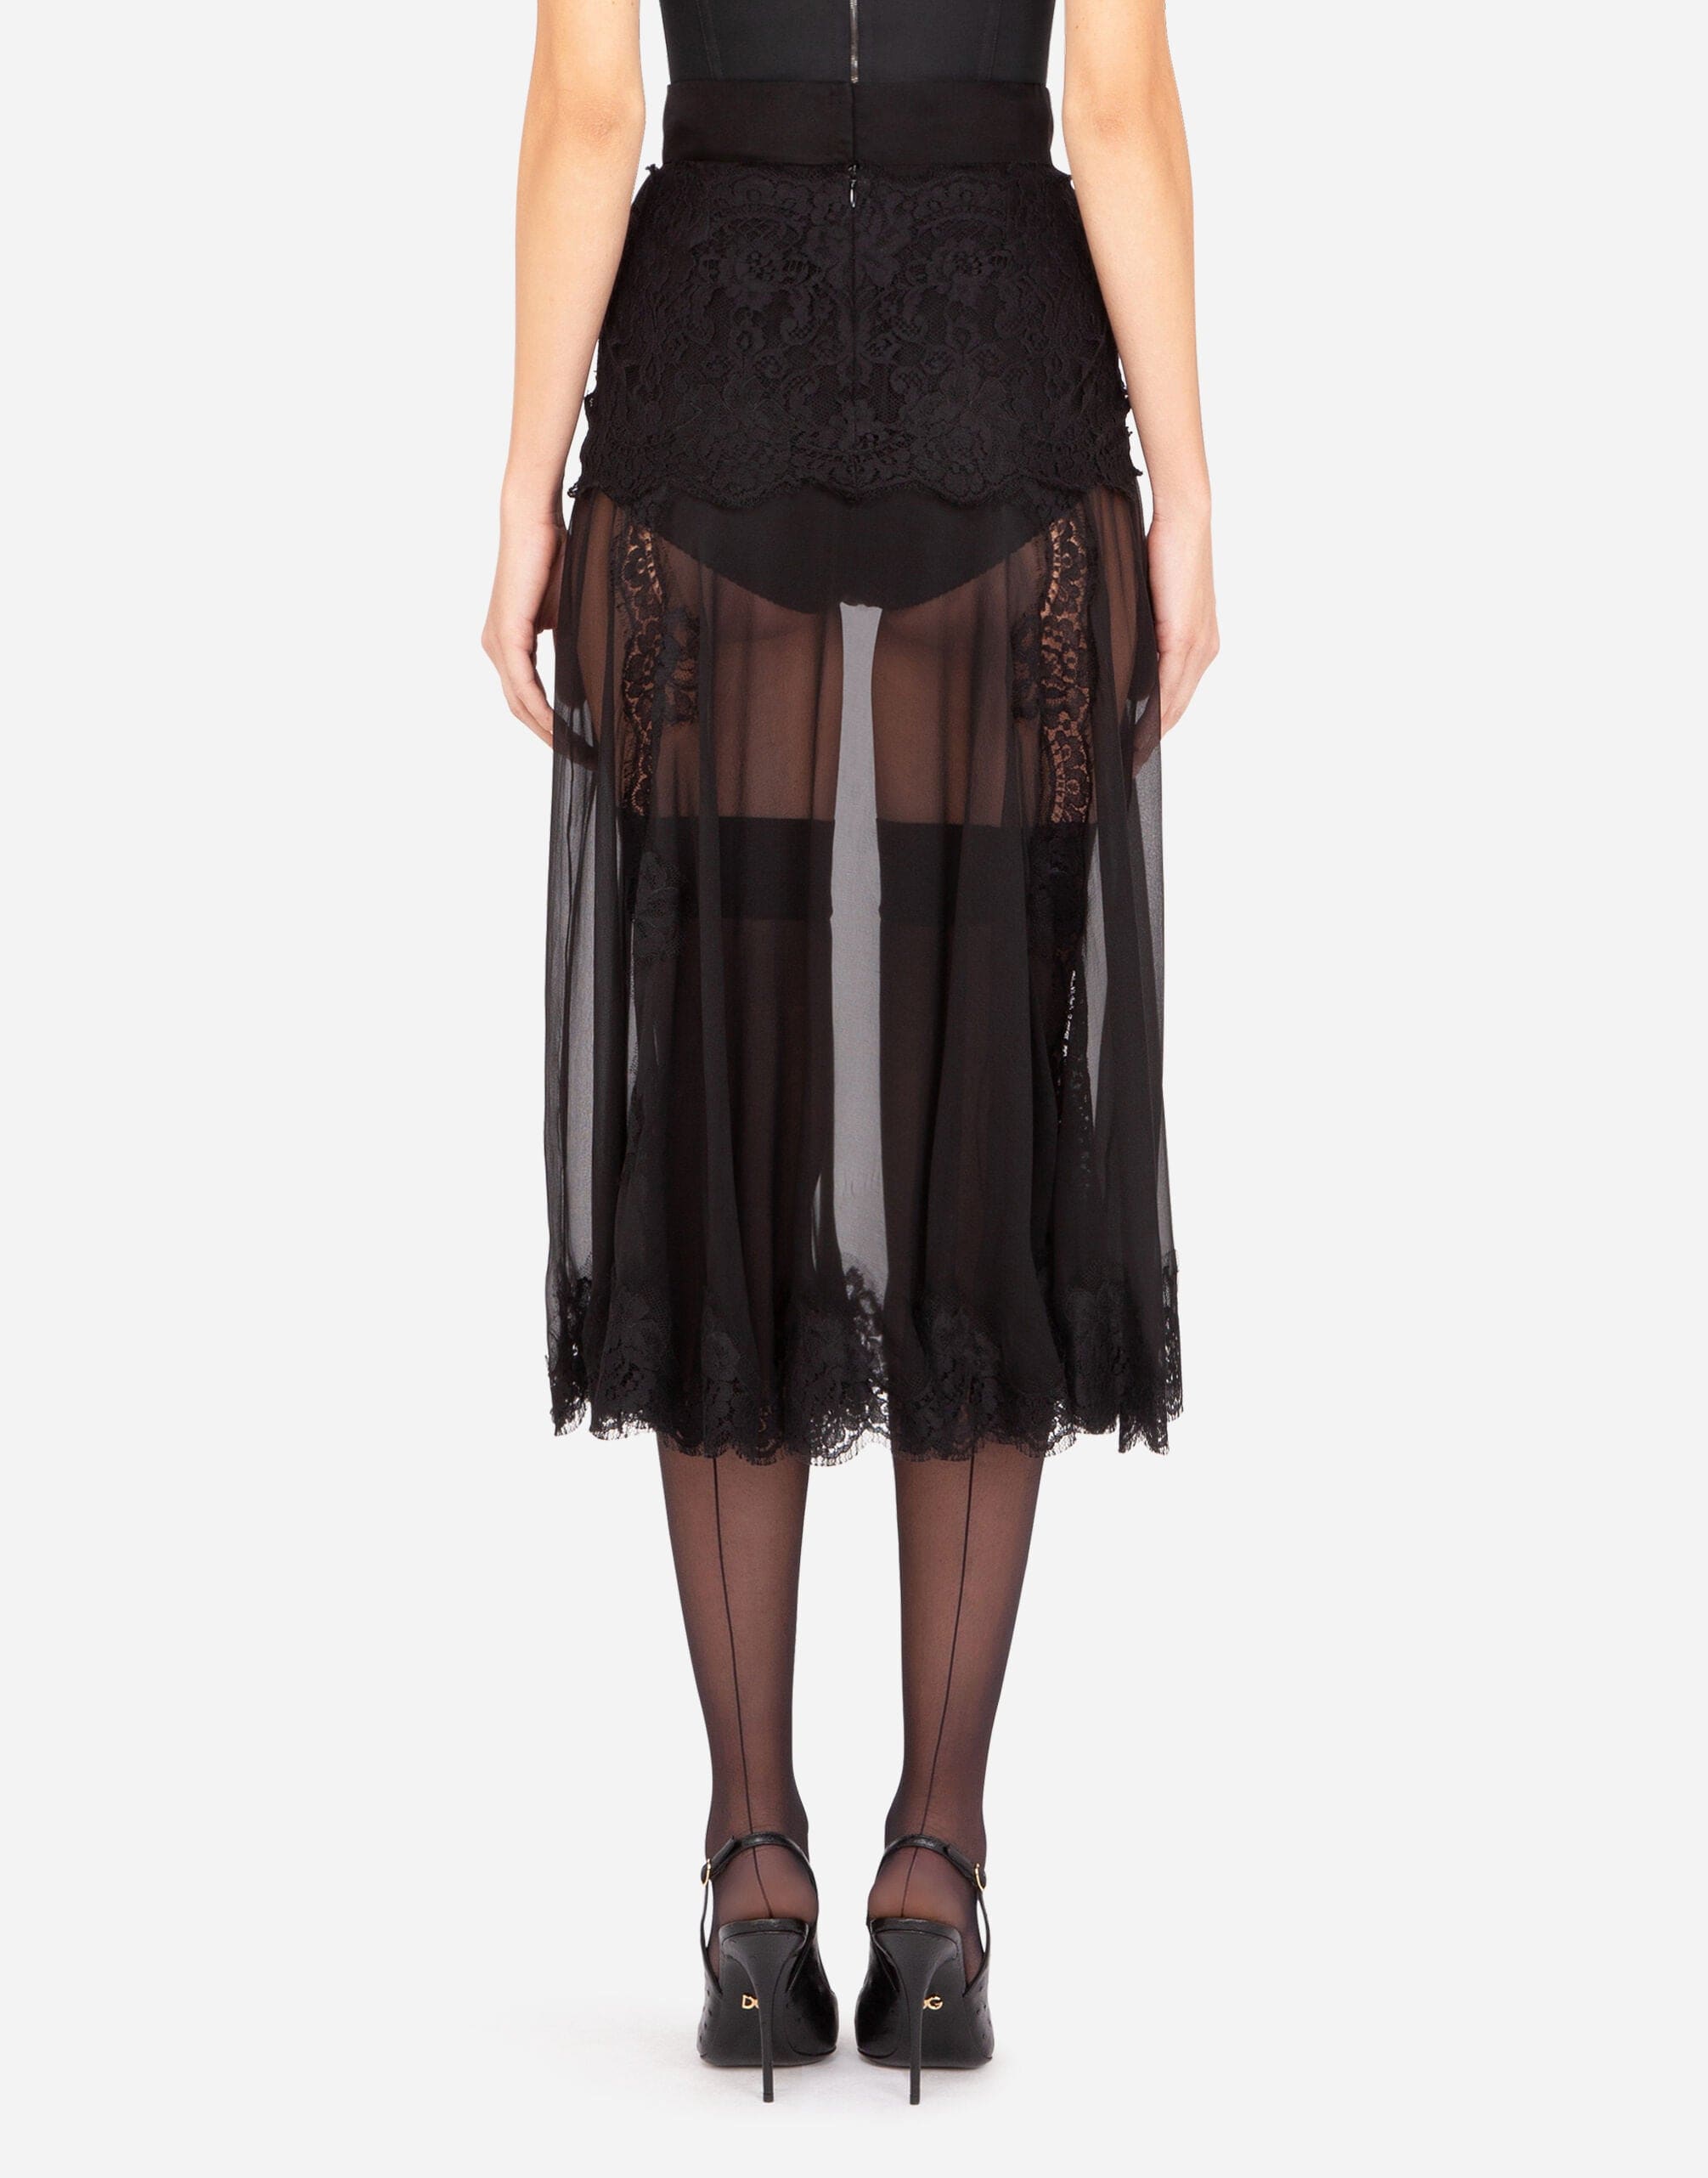 Lace Smoothing Skirt in Dolce' Delight